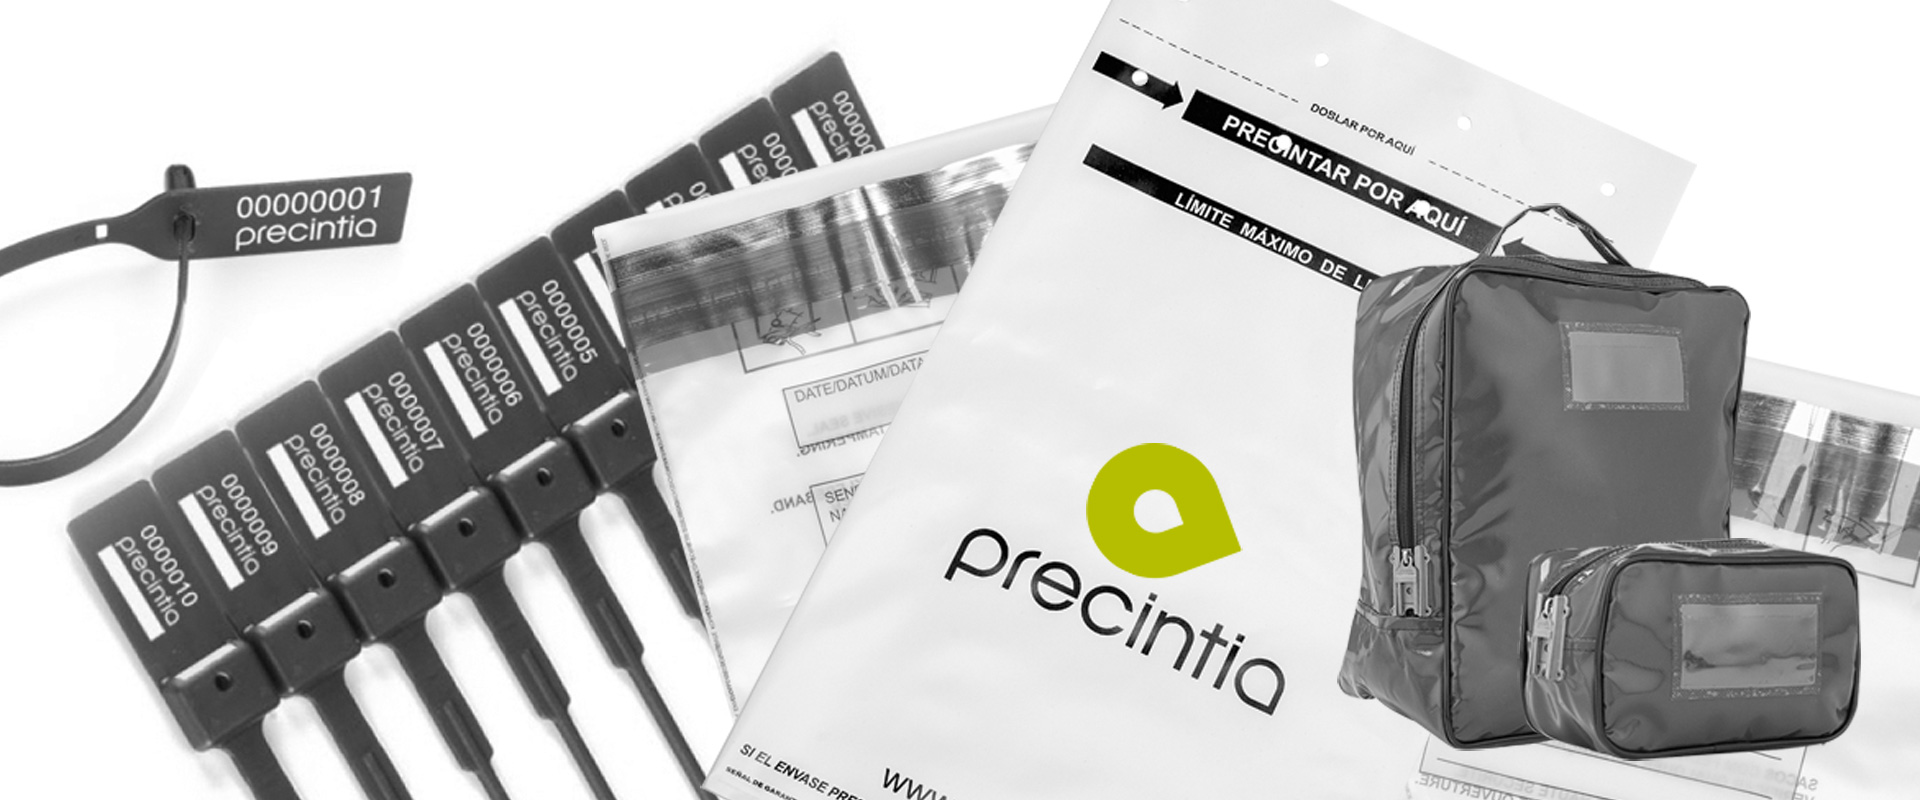 Precintia Other products